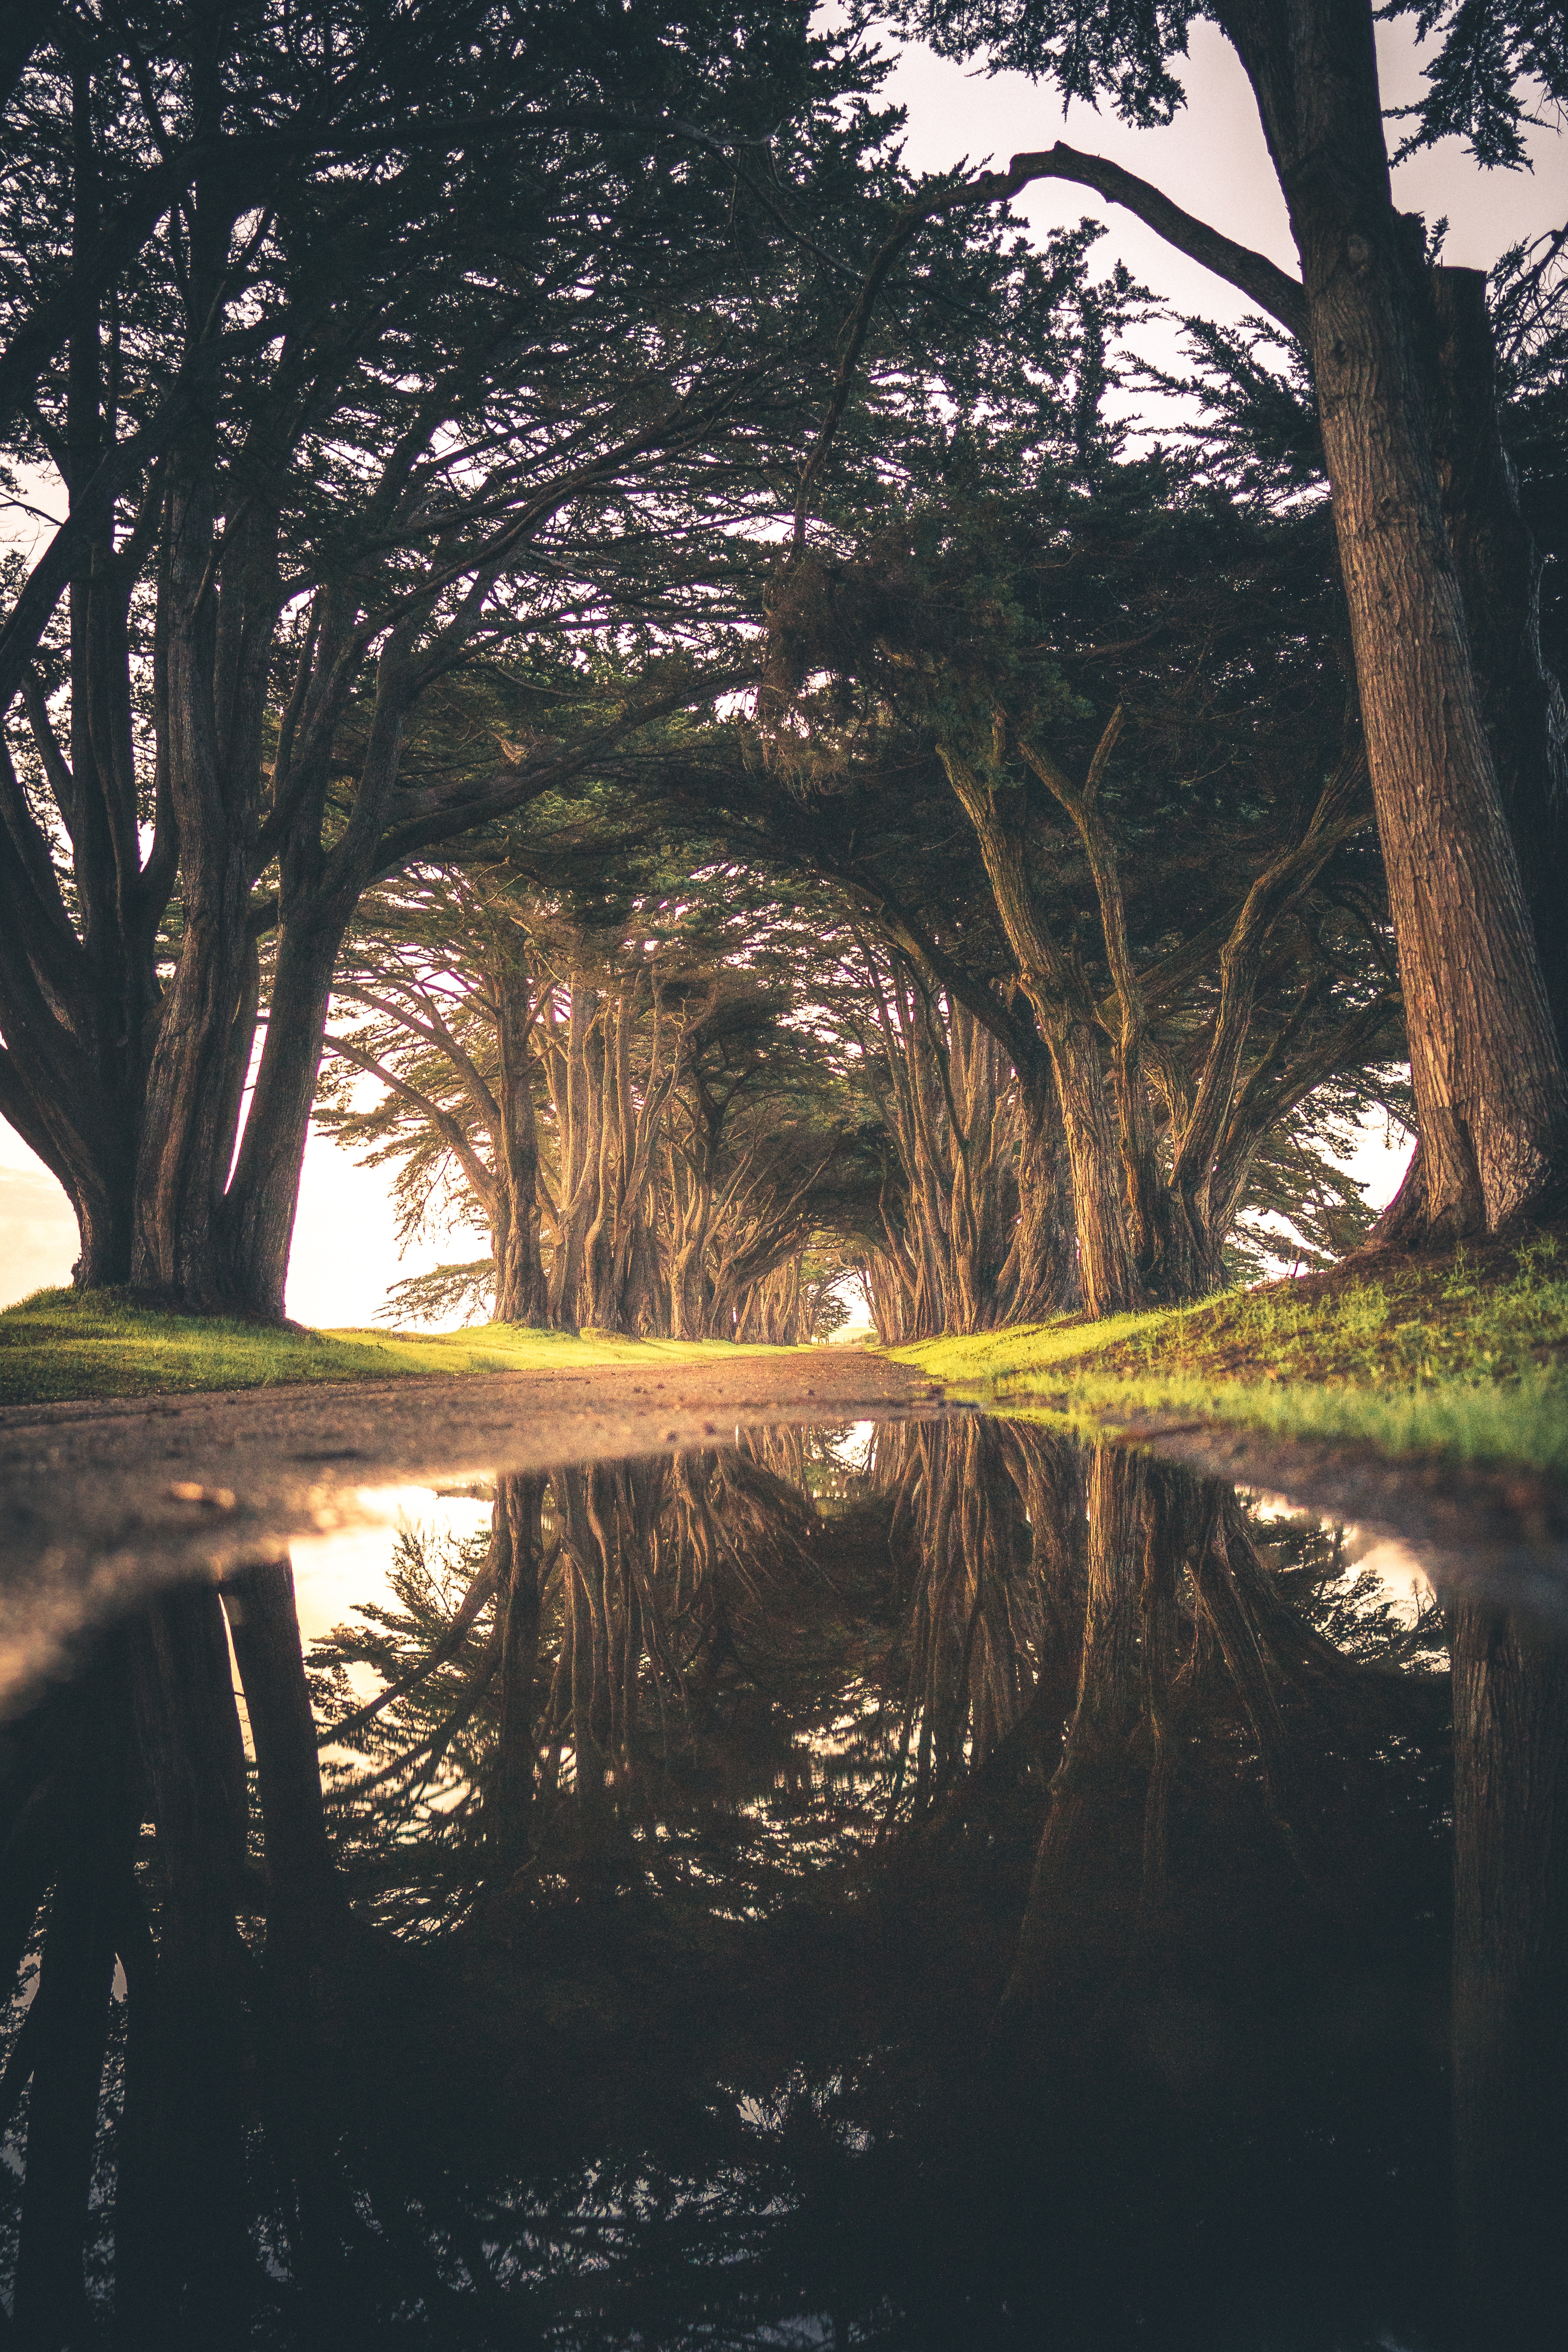 reflection, trees, nature, road, puddle High Definition image